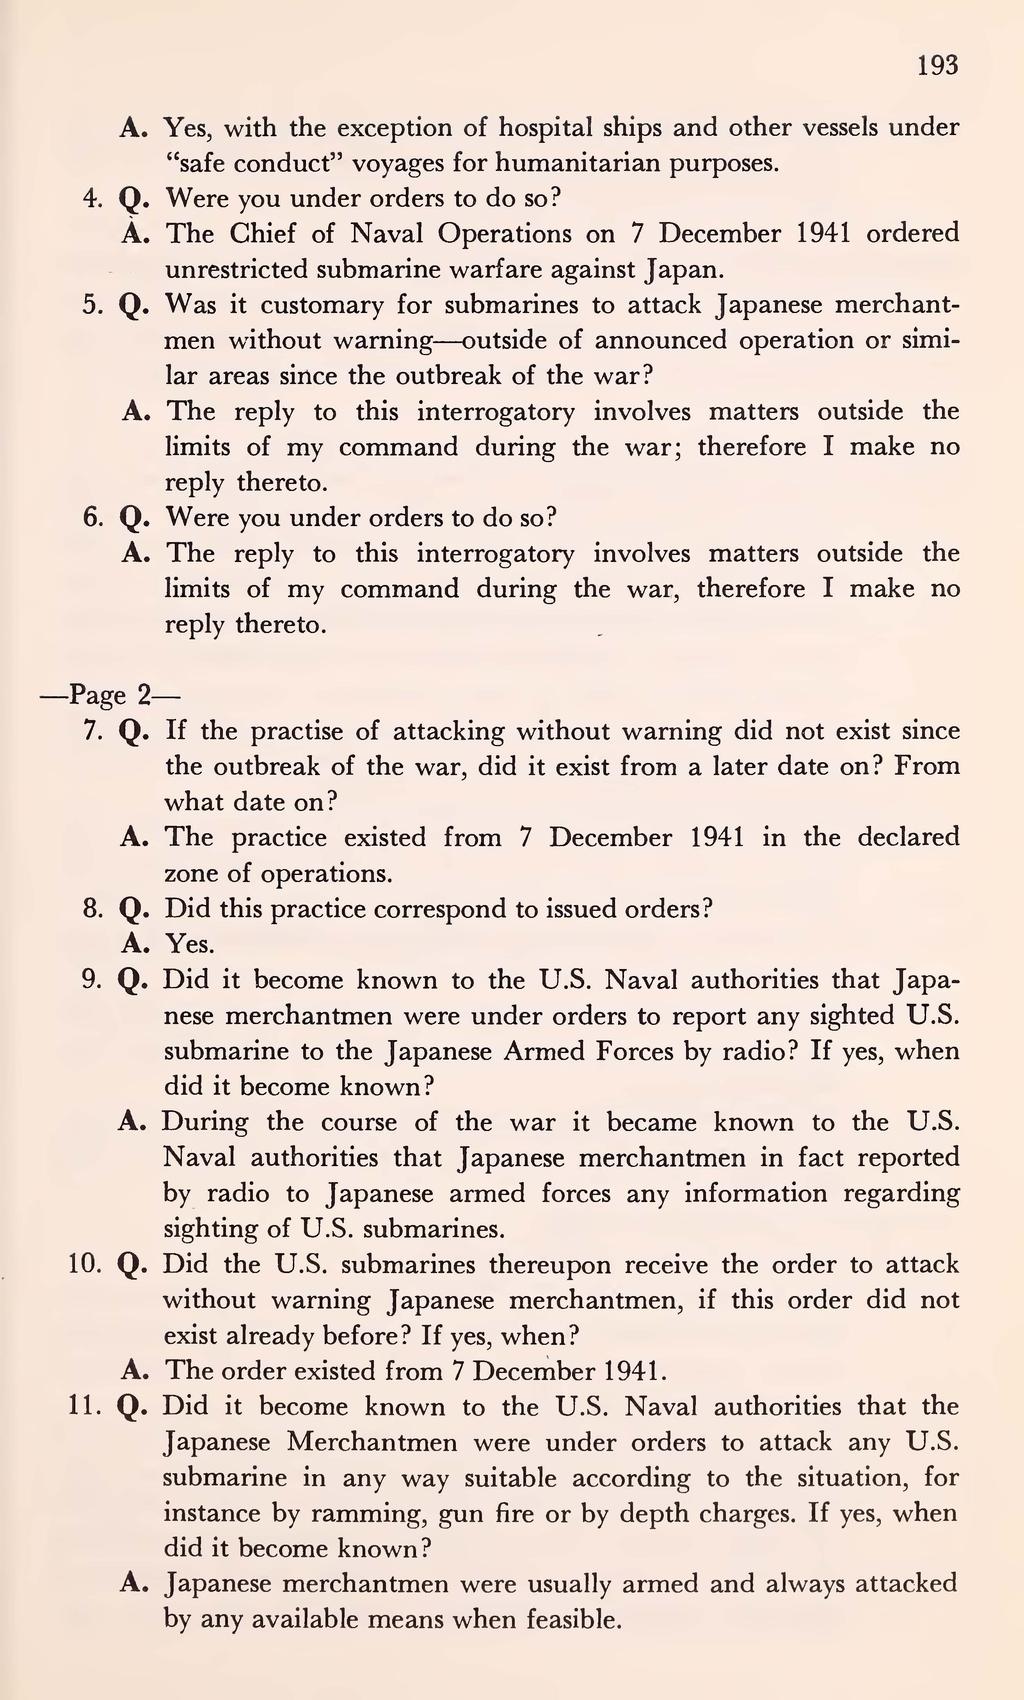 193 A. Yes, with the exception of hospital ships and other vessels under "safe conduct" voyages for humanitarian purposes. 4. Q. Were you under orders to do so? A. The Chief of Naval Operations on 7 December 1941 ordered unrestricted submarine warfare against Japan.